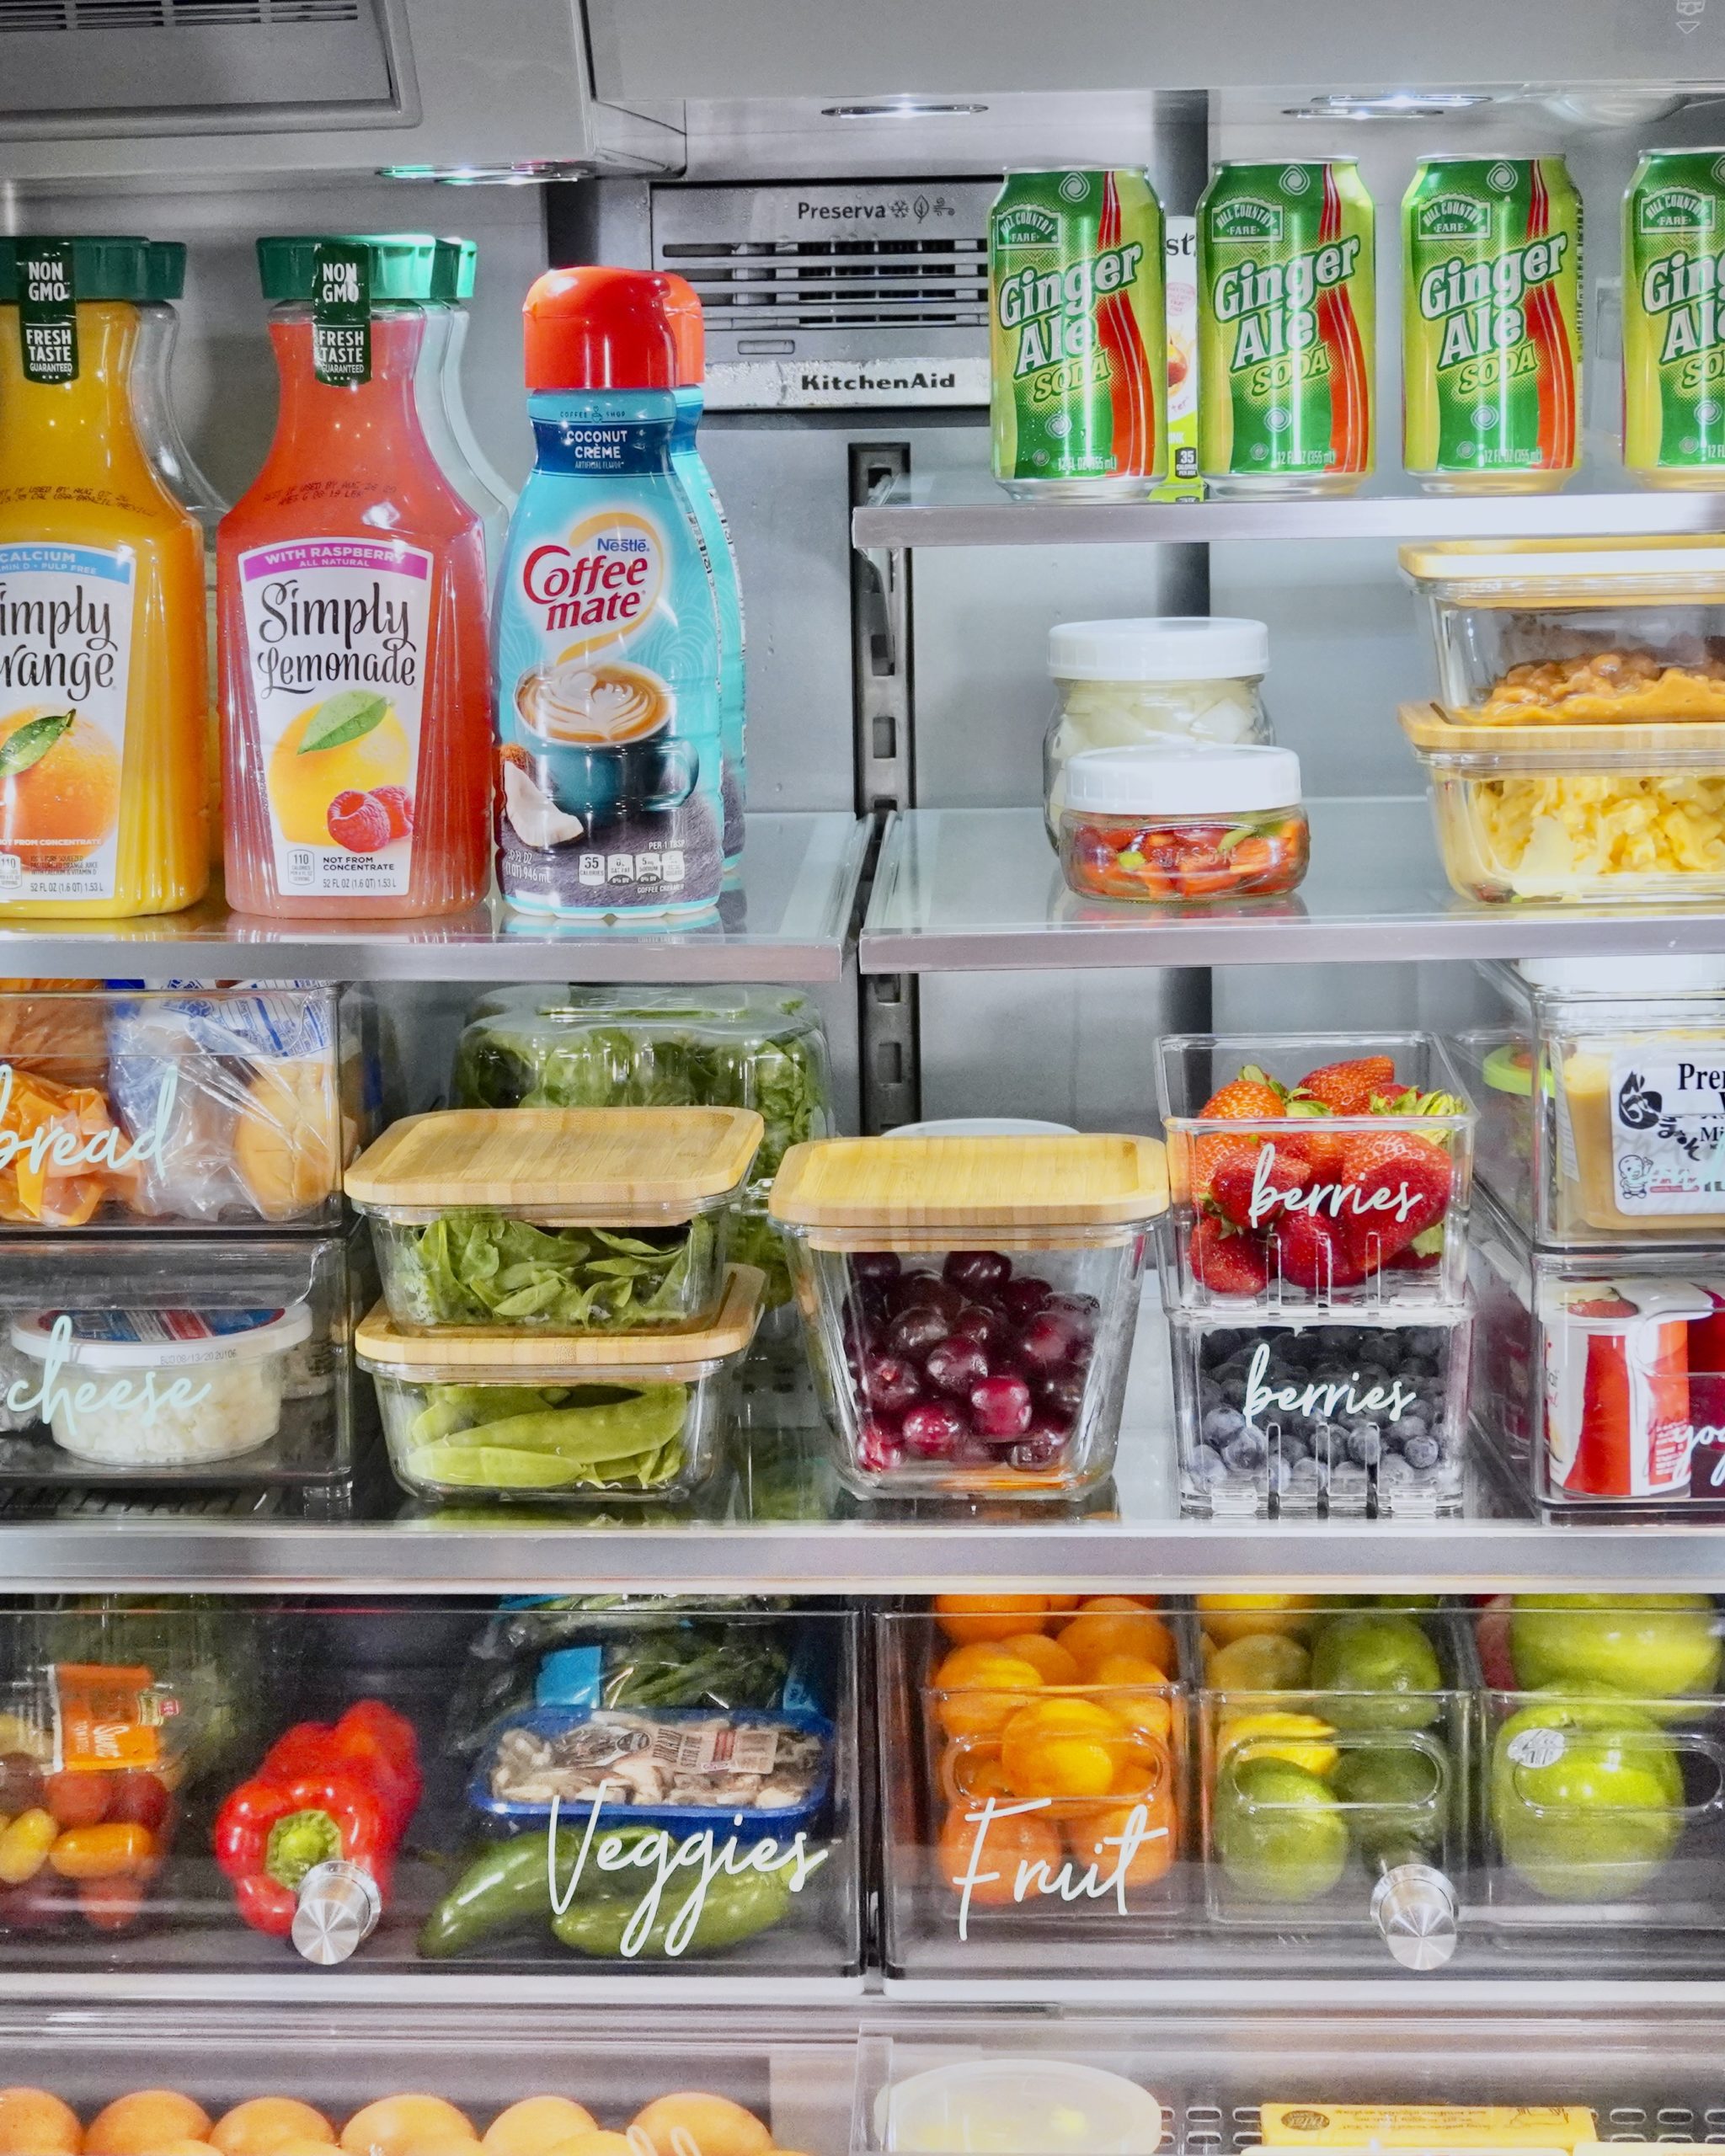 How to Organize a Refrigerator in 13 Quick Steps